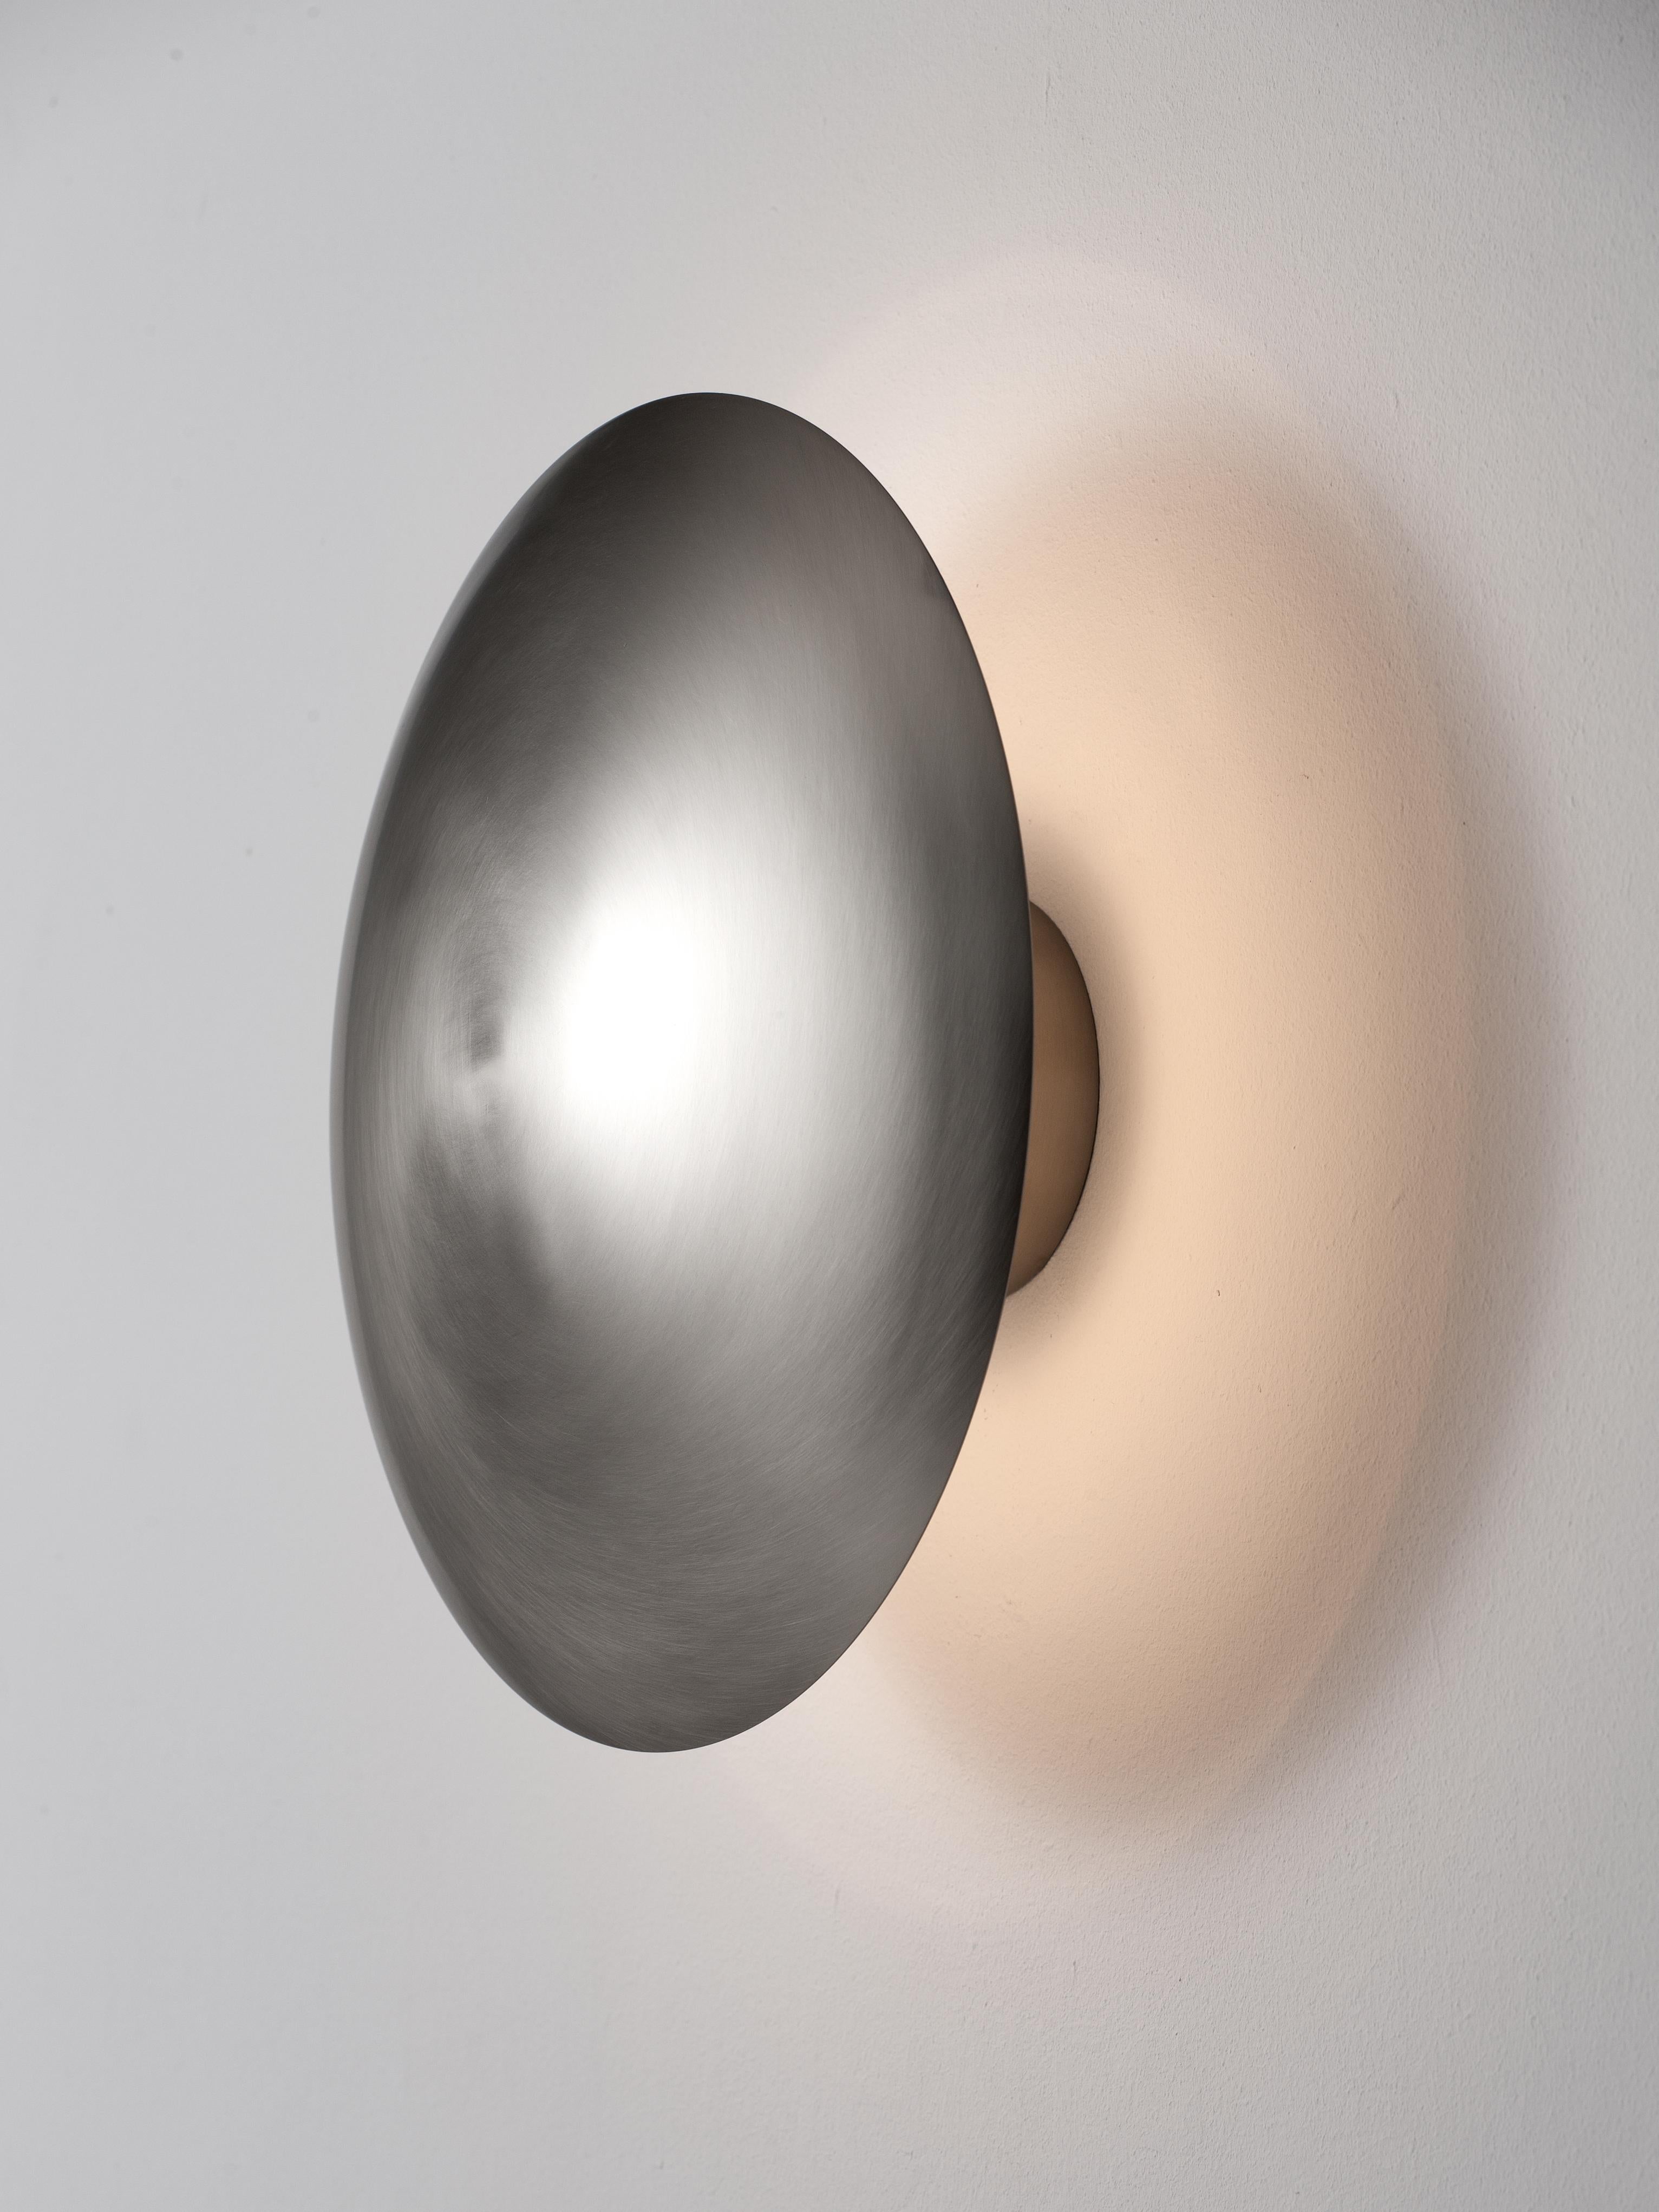 Large Disco wall lamp by Jordi Miralbell, Mariona Raventós
Dimensions: D 35 x W 14.5 x H 35 cm
Materials: Metal.
Available in 2 sizes: D24, D35 cm.

This metallic disc, available in two sizes, M and L, reflects its light on the wall, creating a